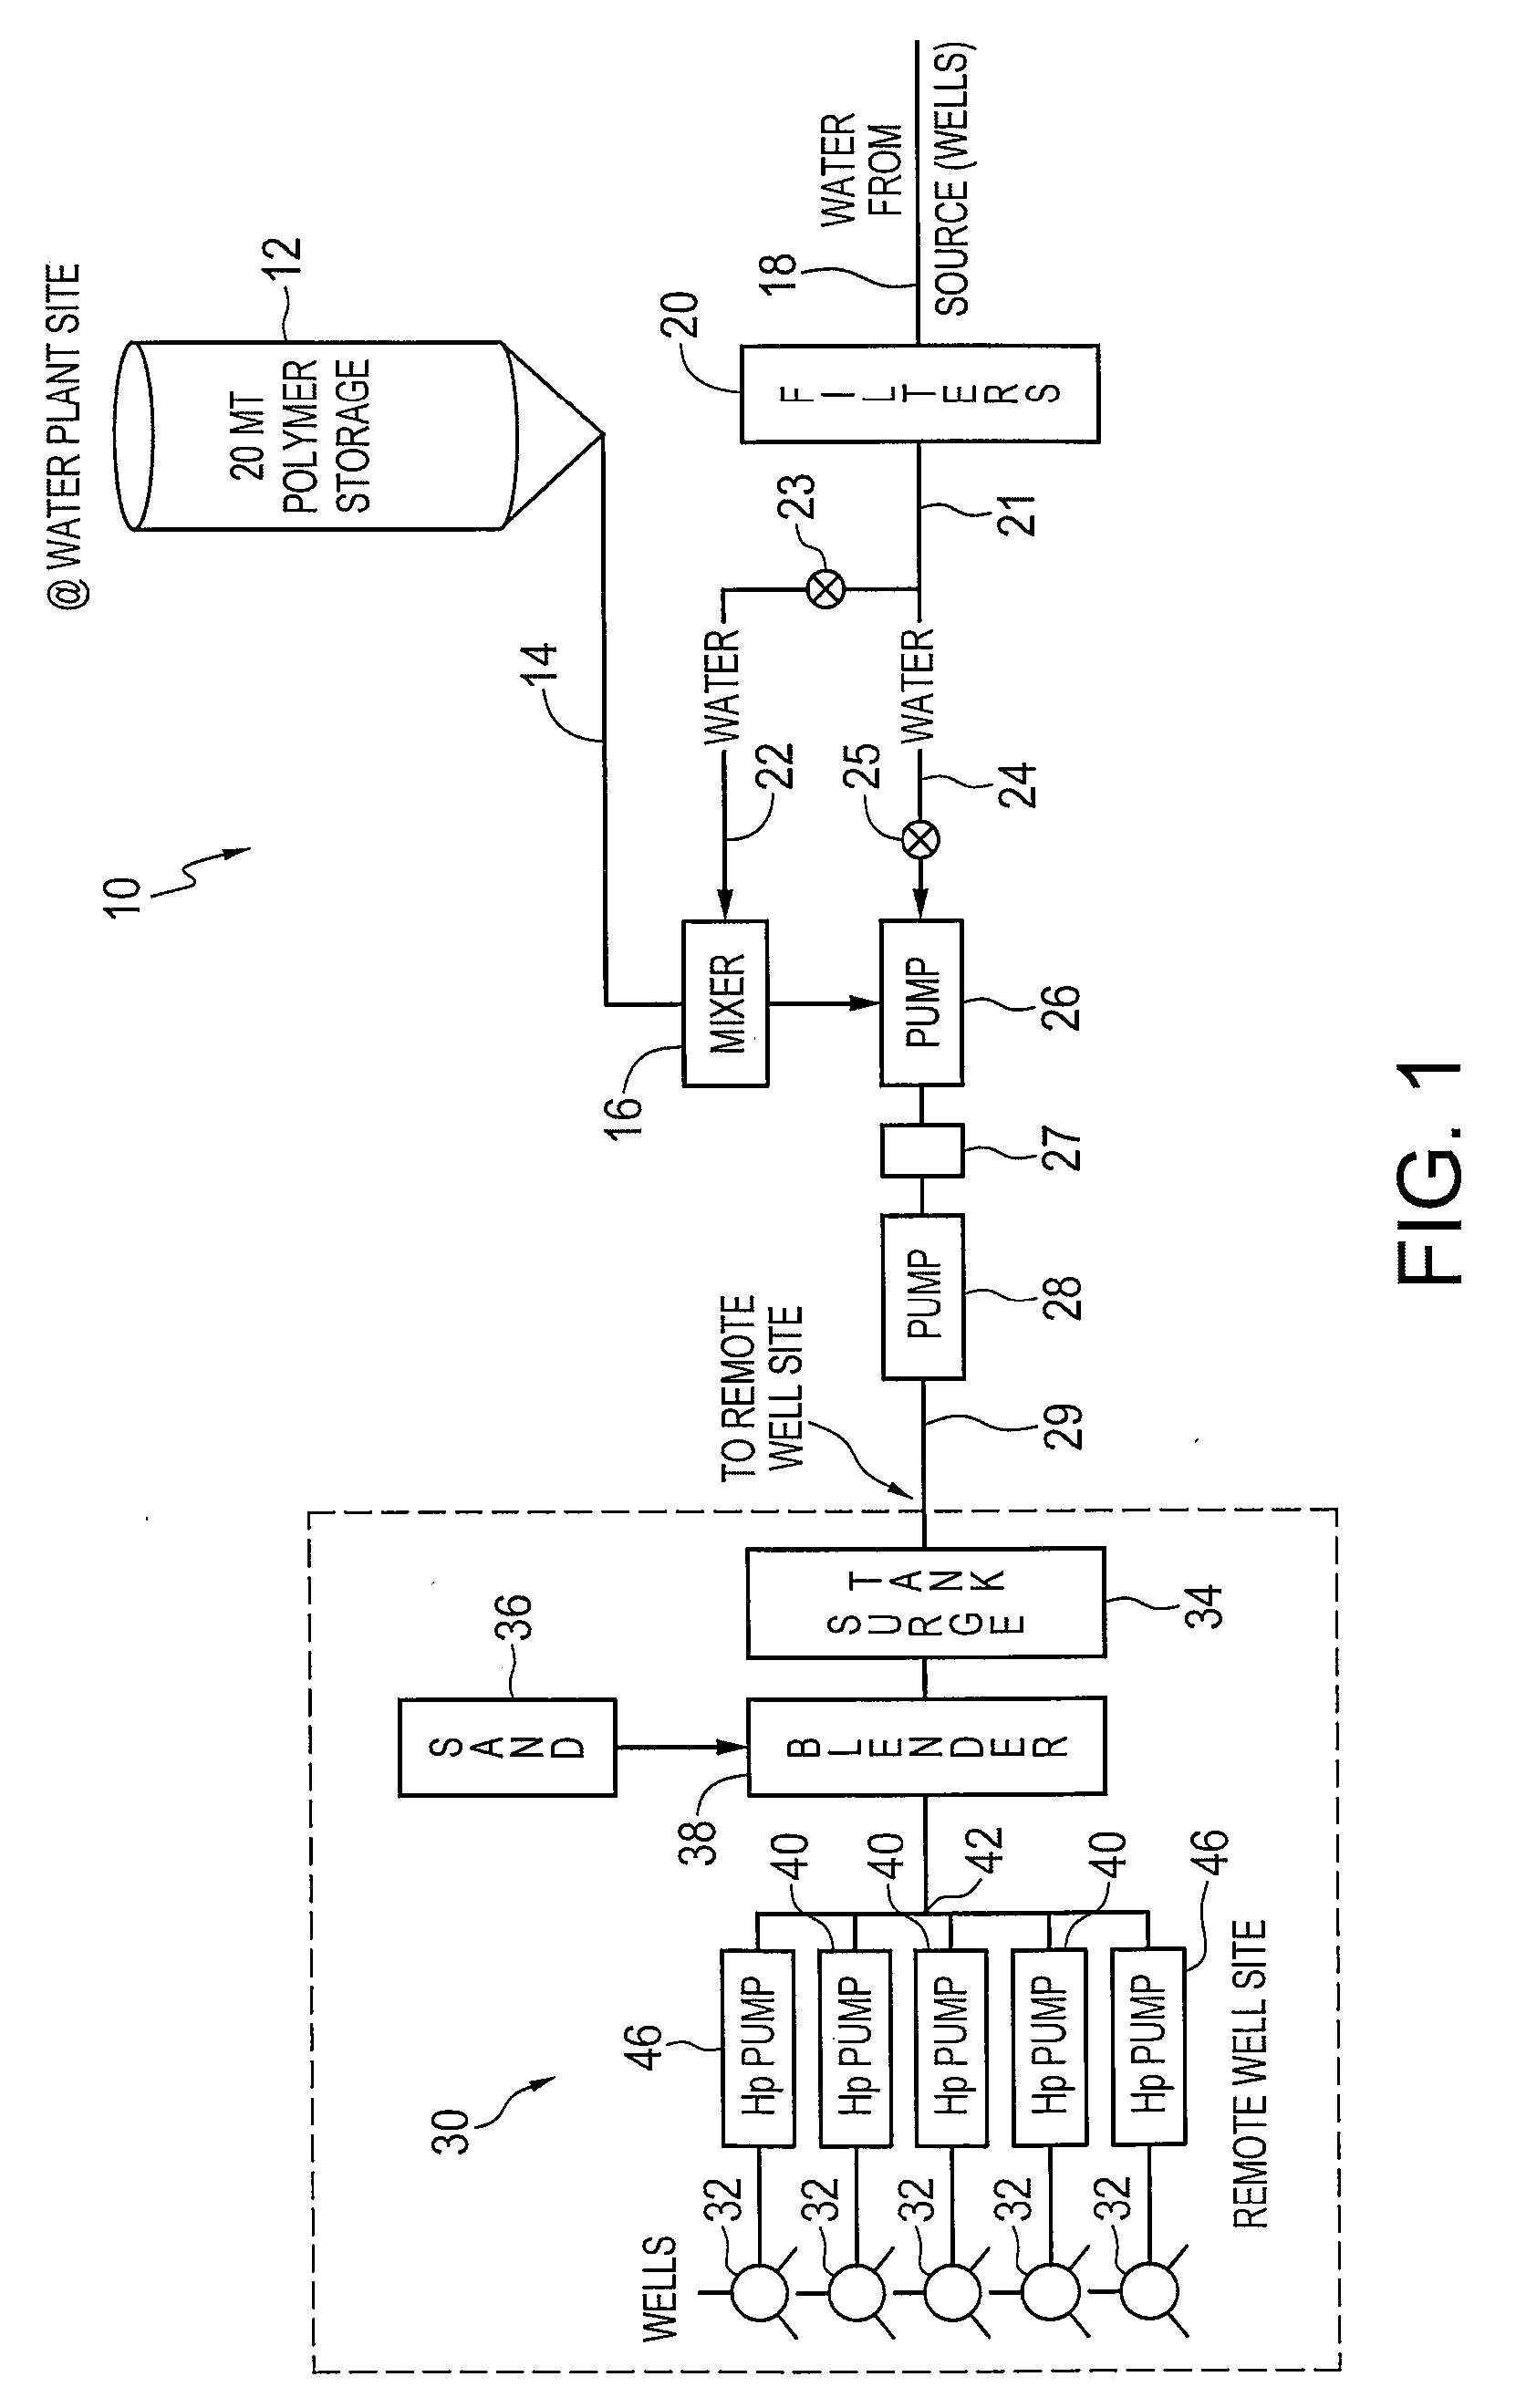 Process and process line for the preparation of hydraulic fracturing fluid